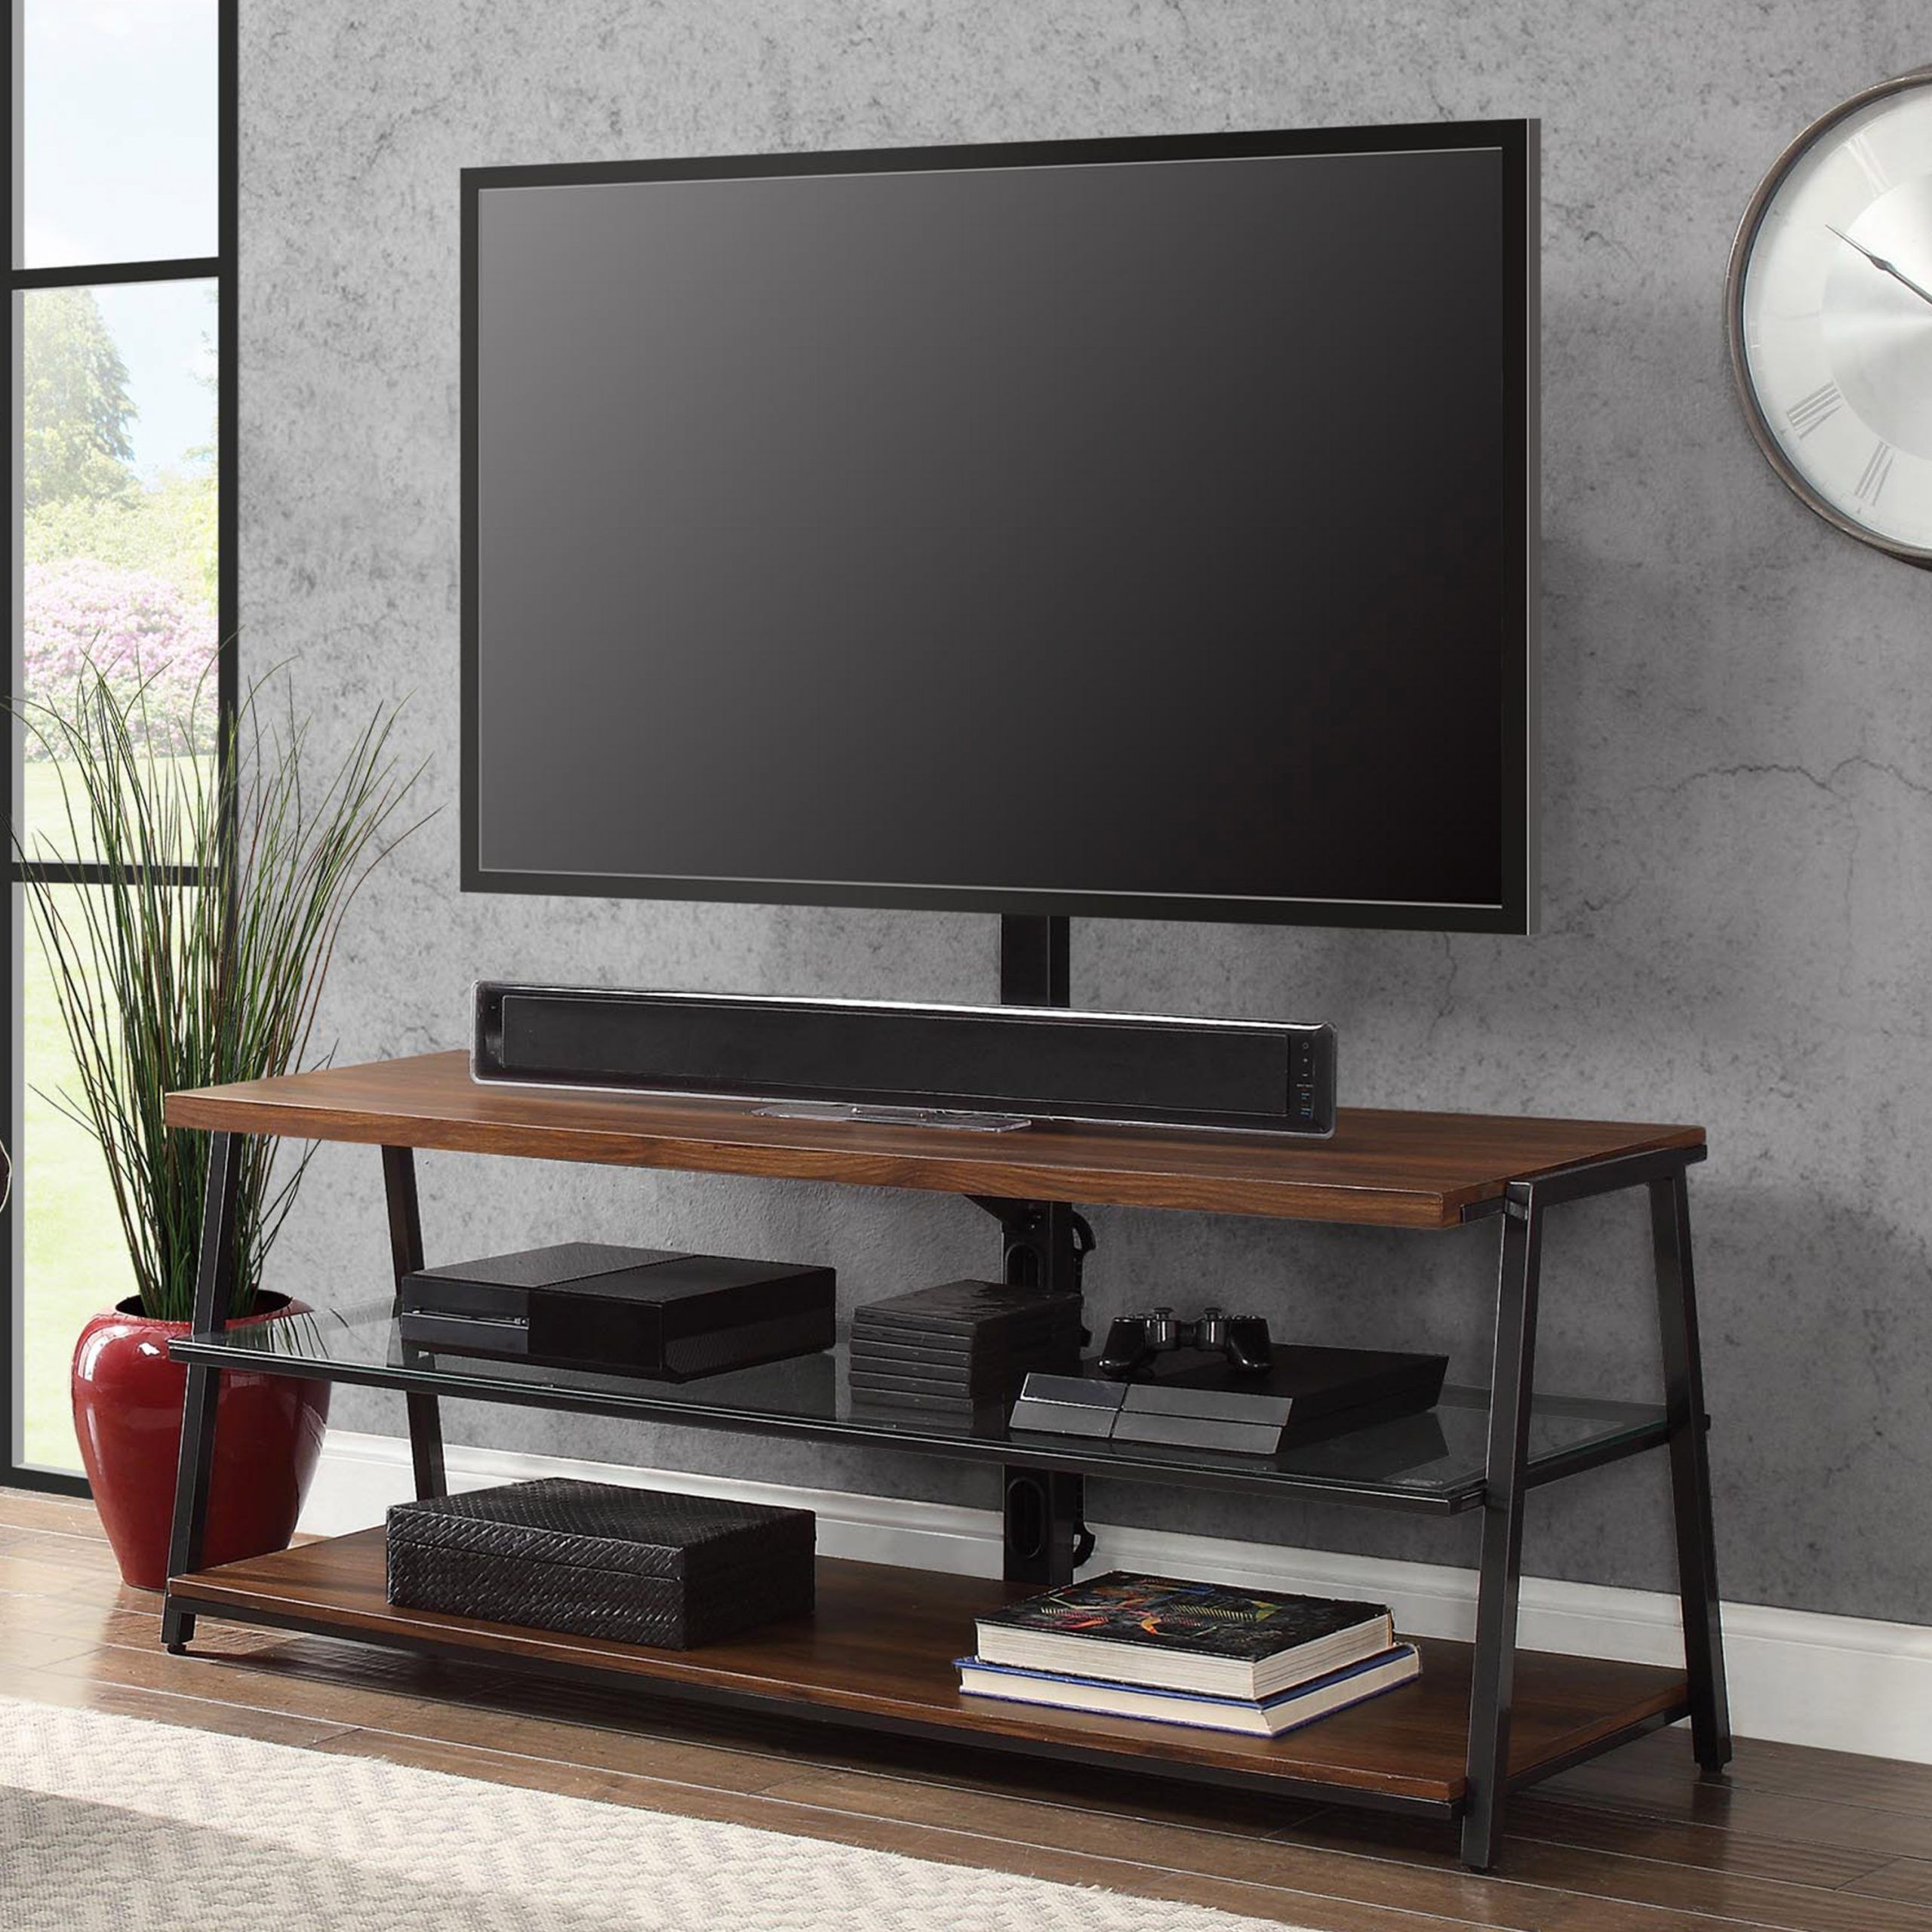 Mainstays Arris 3 In 1 Tv Stand For Televisions Up To 70 Within Mainstays Arris 3 In 1 Tv Stands In Canyon Walnut Finish (View 2 of 15)